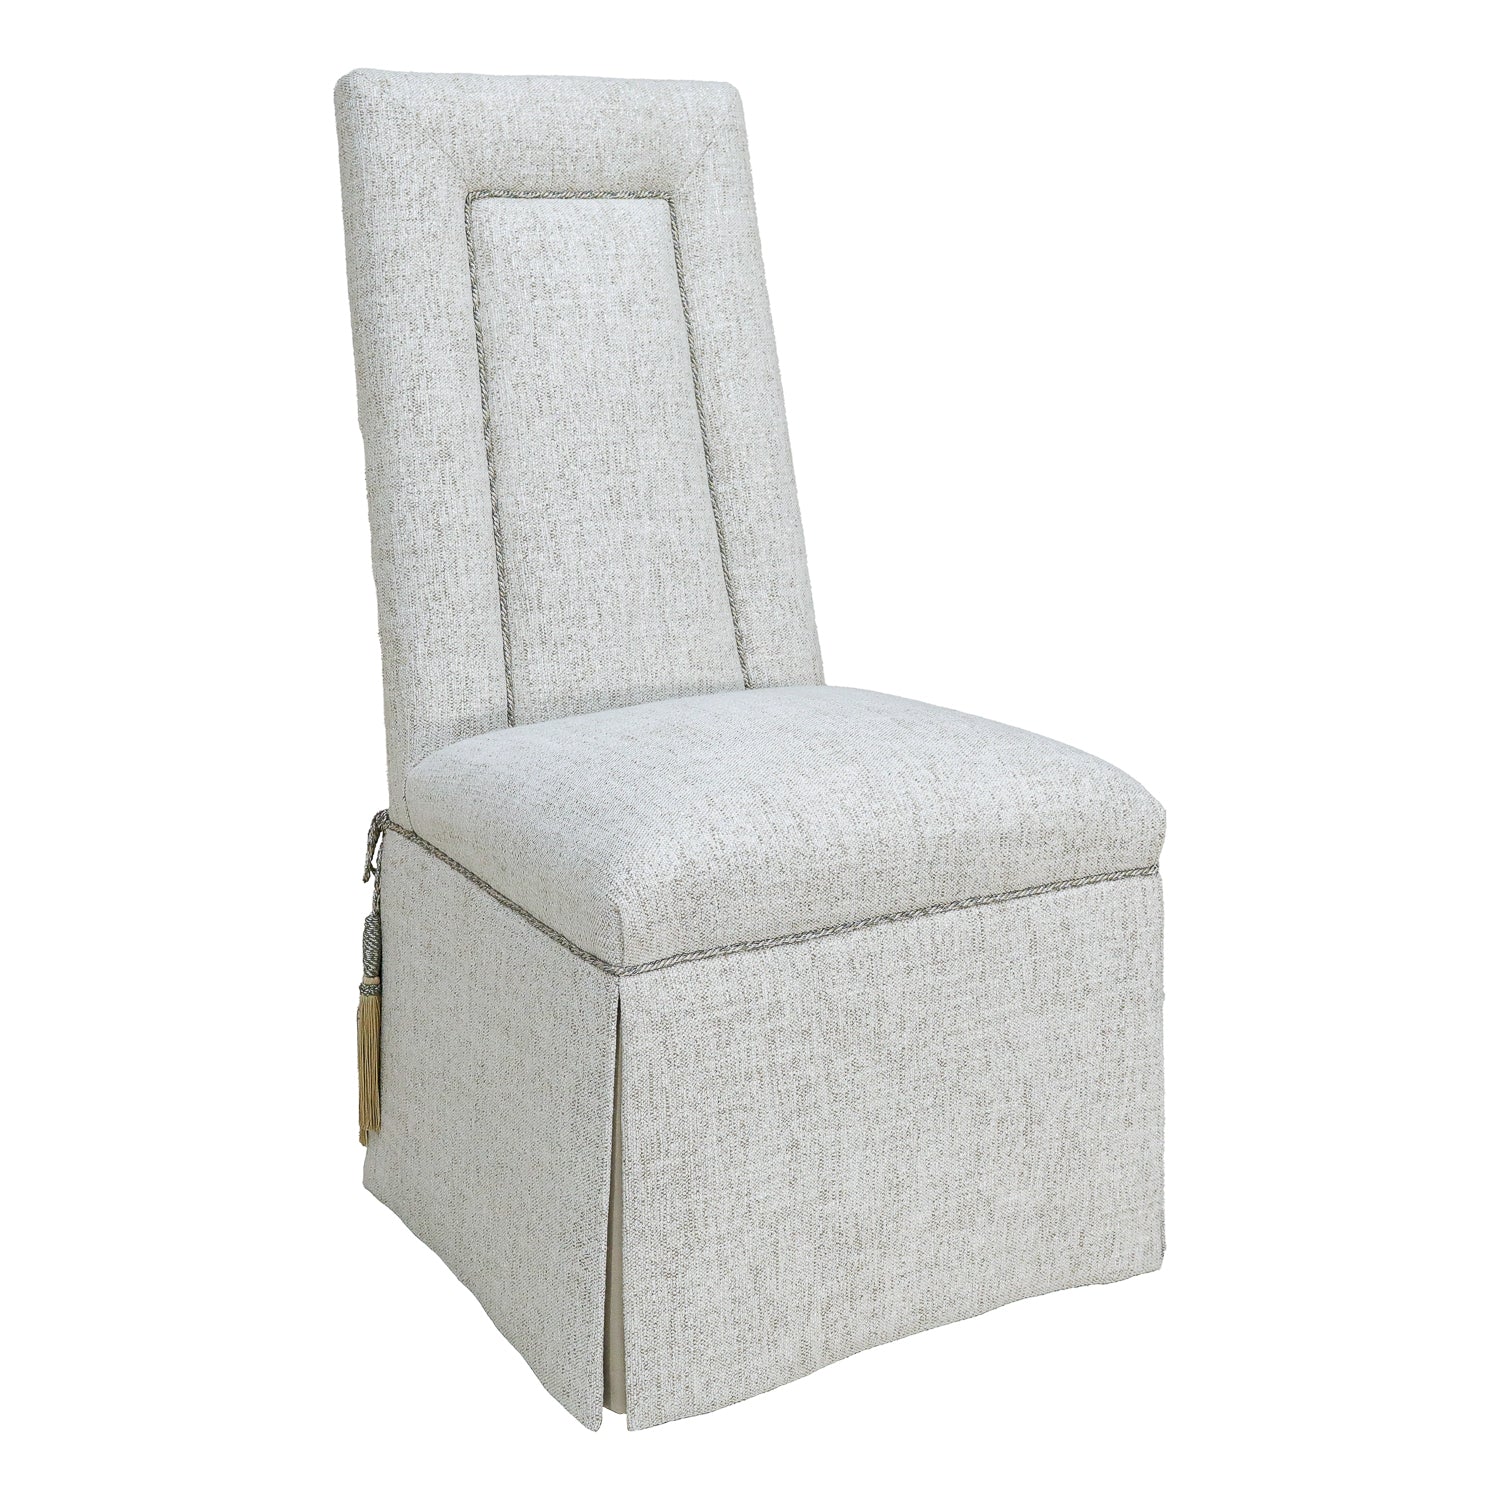 Justina Side Chair